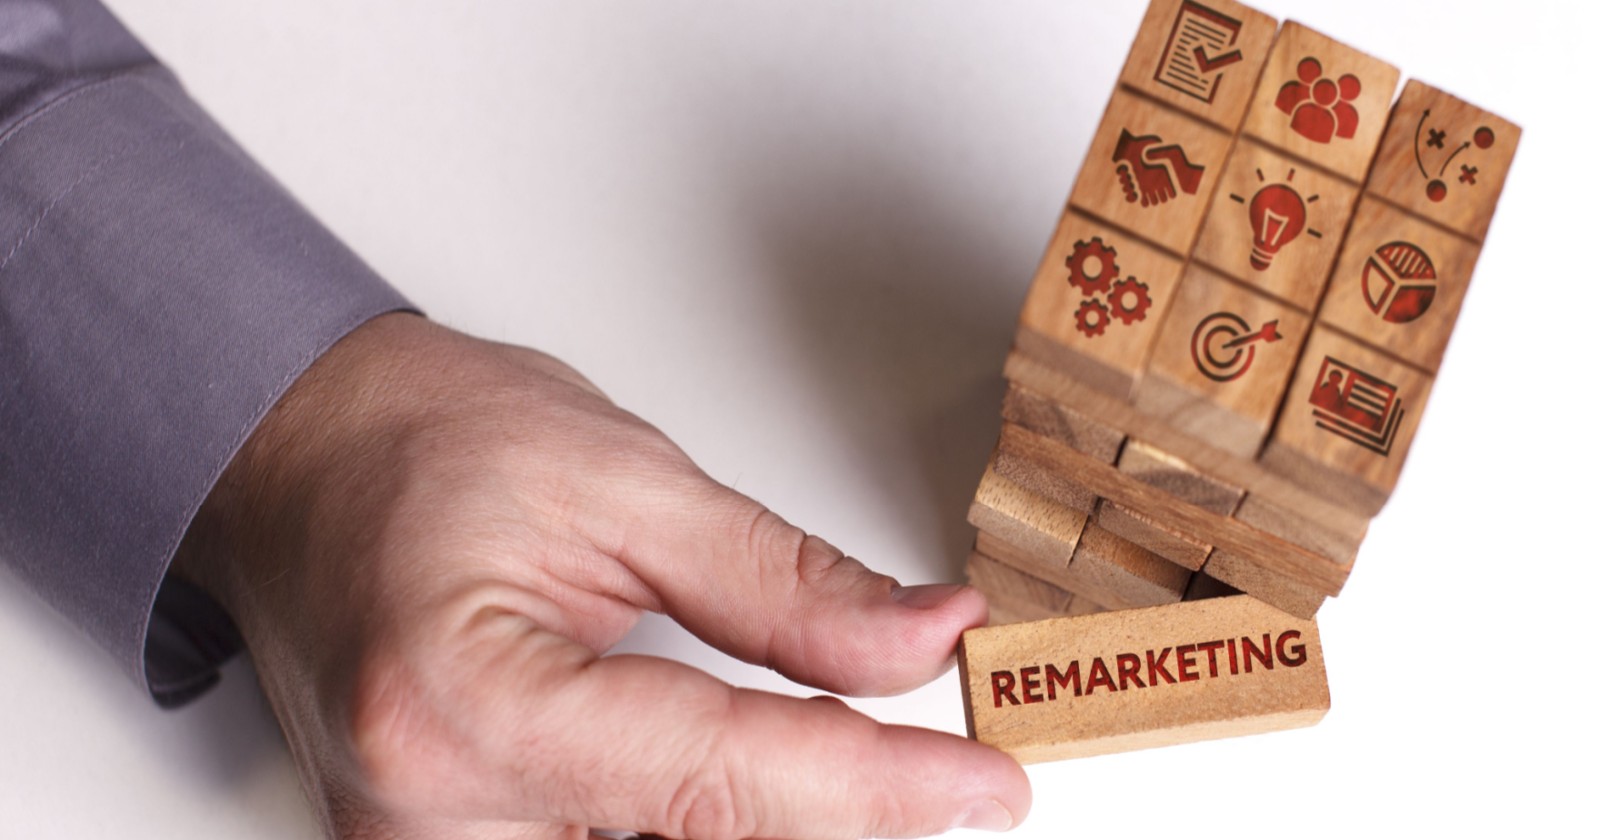 8 mistakes to avoid in your remarketing campaigns